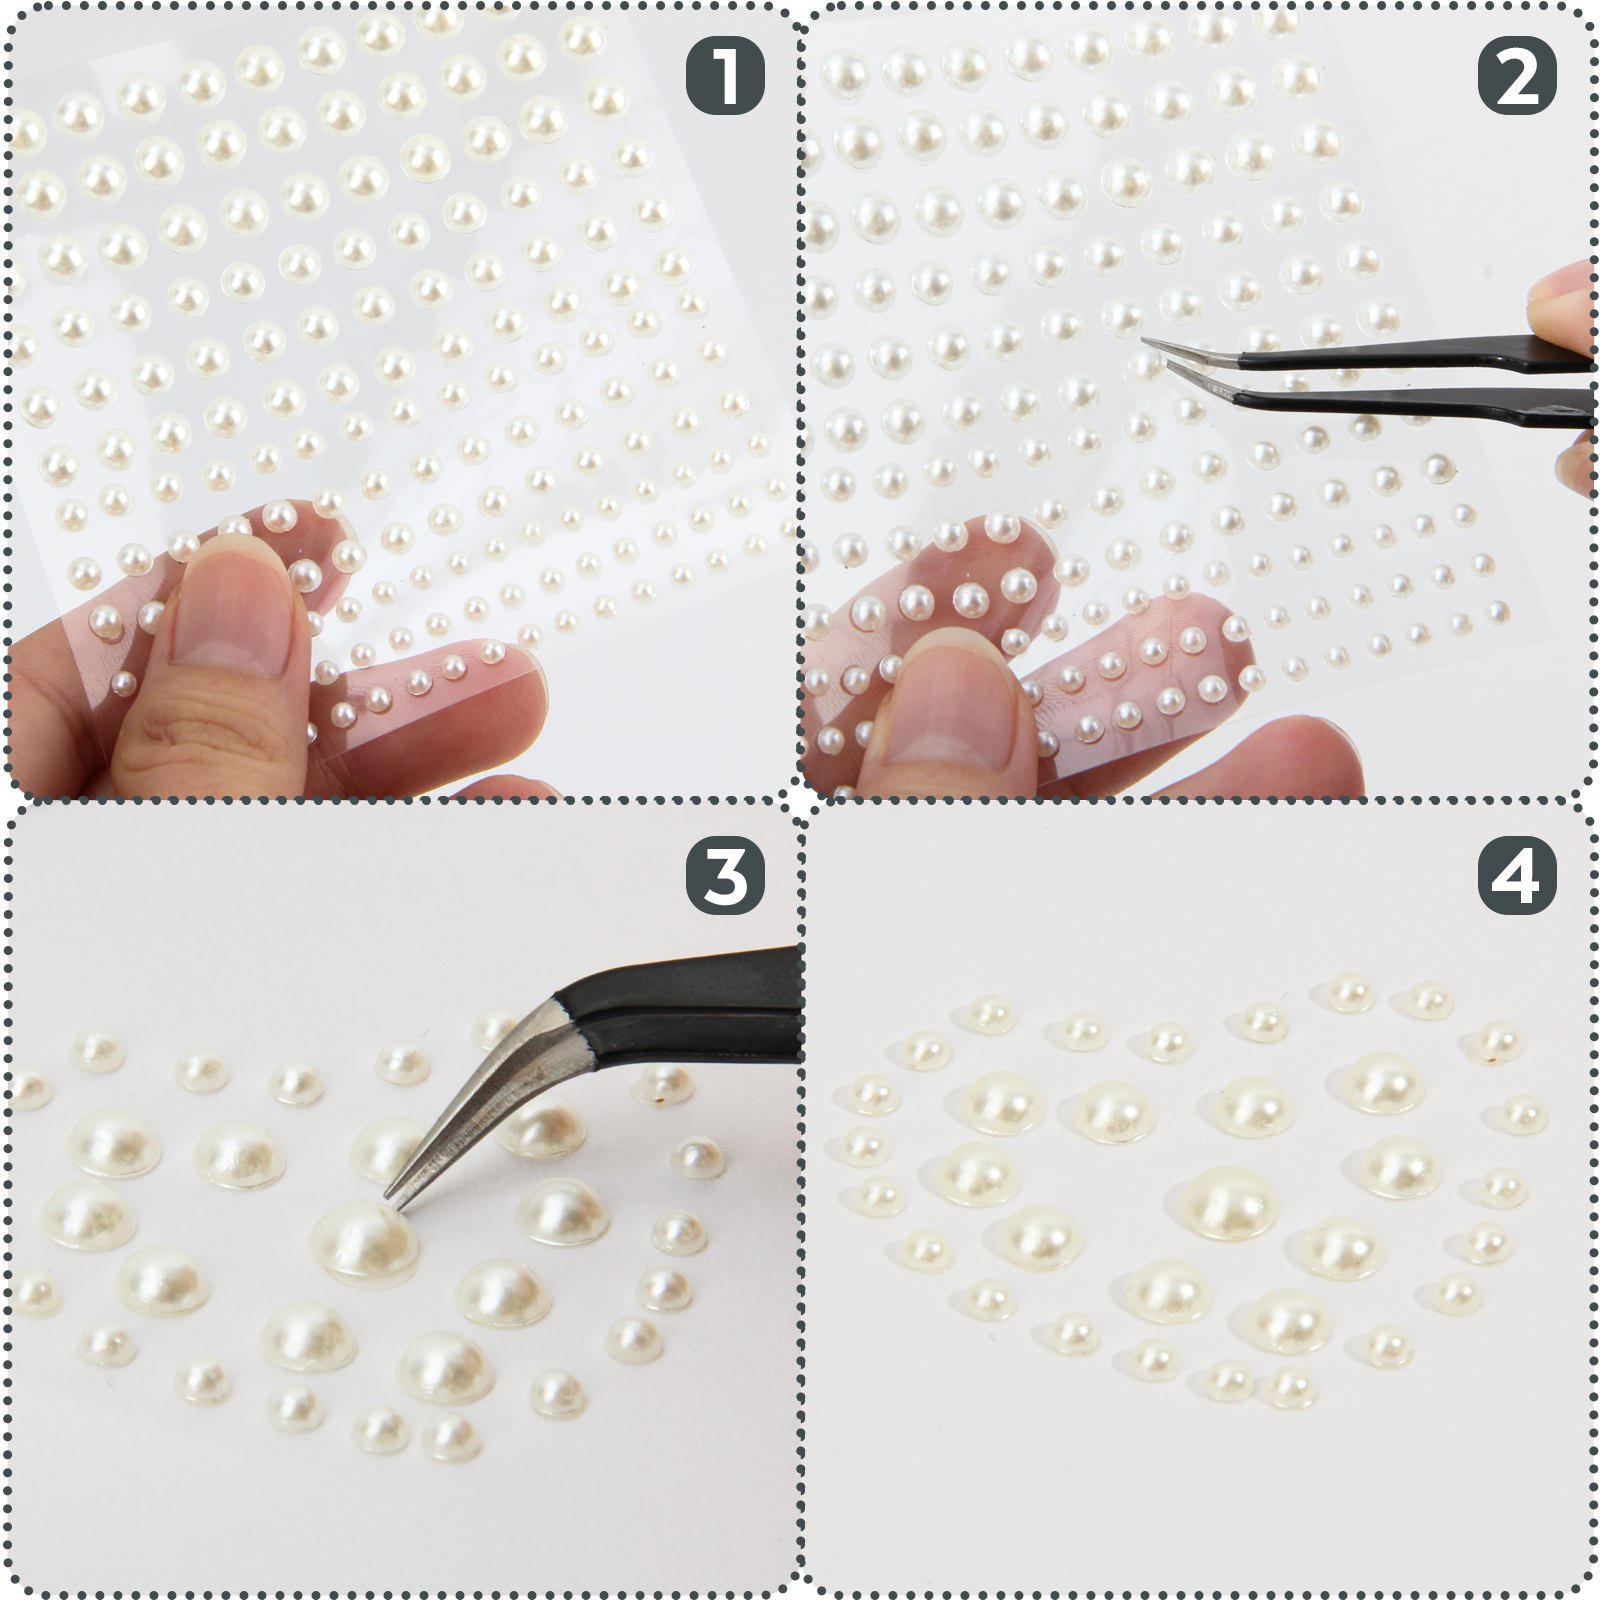  990 Pcs Self Adhesive Pearl Stickers, White Flat Back Pearls  Sticker for Face Beauty Makeup Nail Art Cell Phone DIY Crafts Home Decor  Scrapbooking Embellishments, 3mm/4mm/5mm/6mm (900) (900)